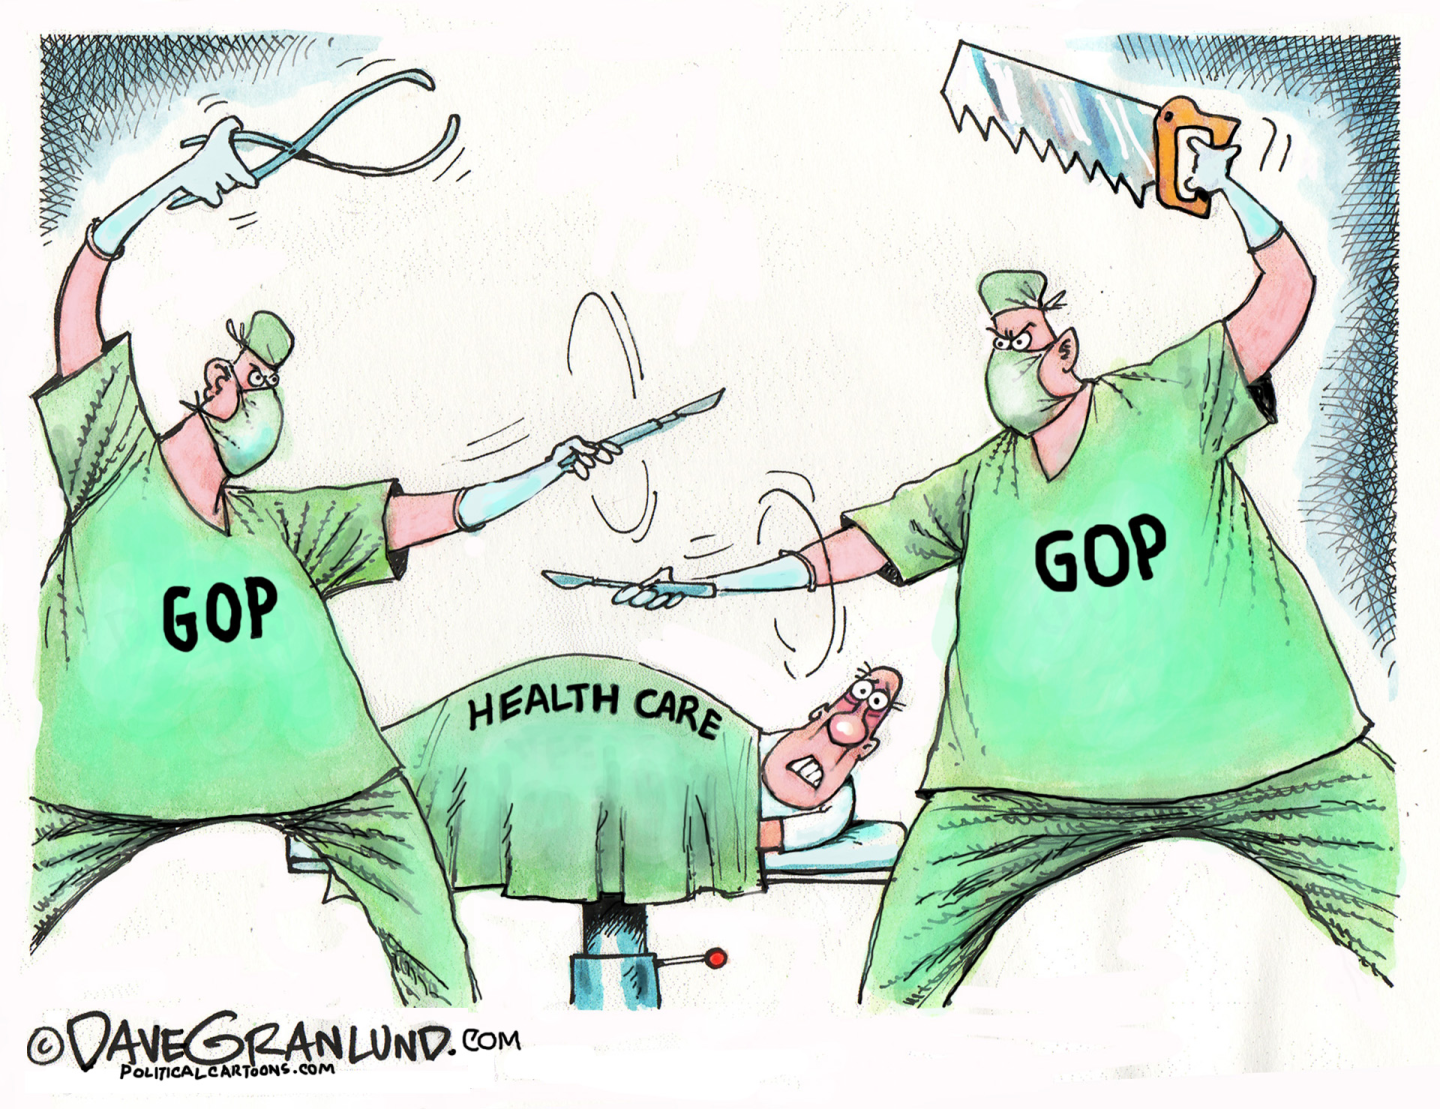 Republicans reject Federal healthcare funding, close rural hospitals and deny their constituents affordable medical care.